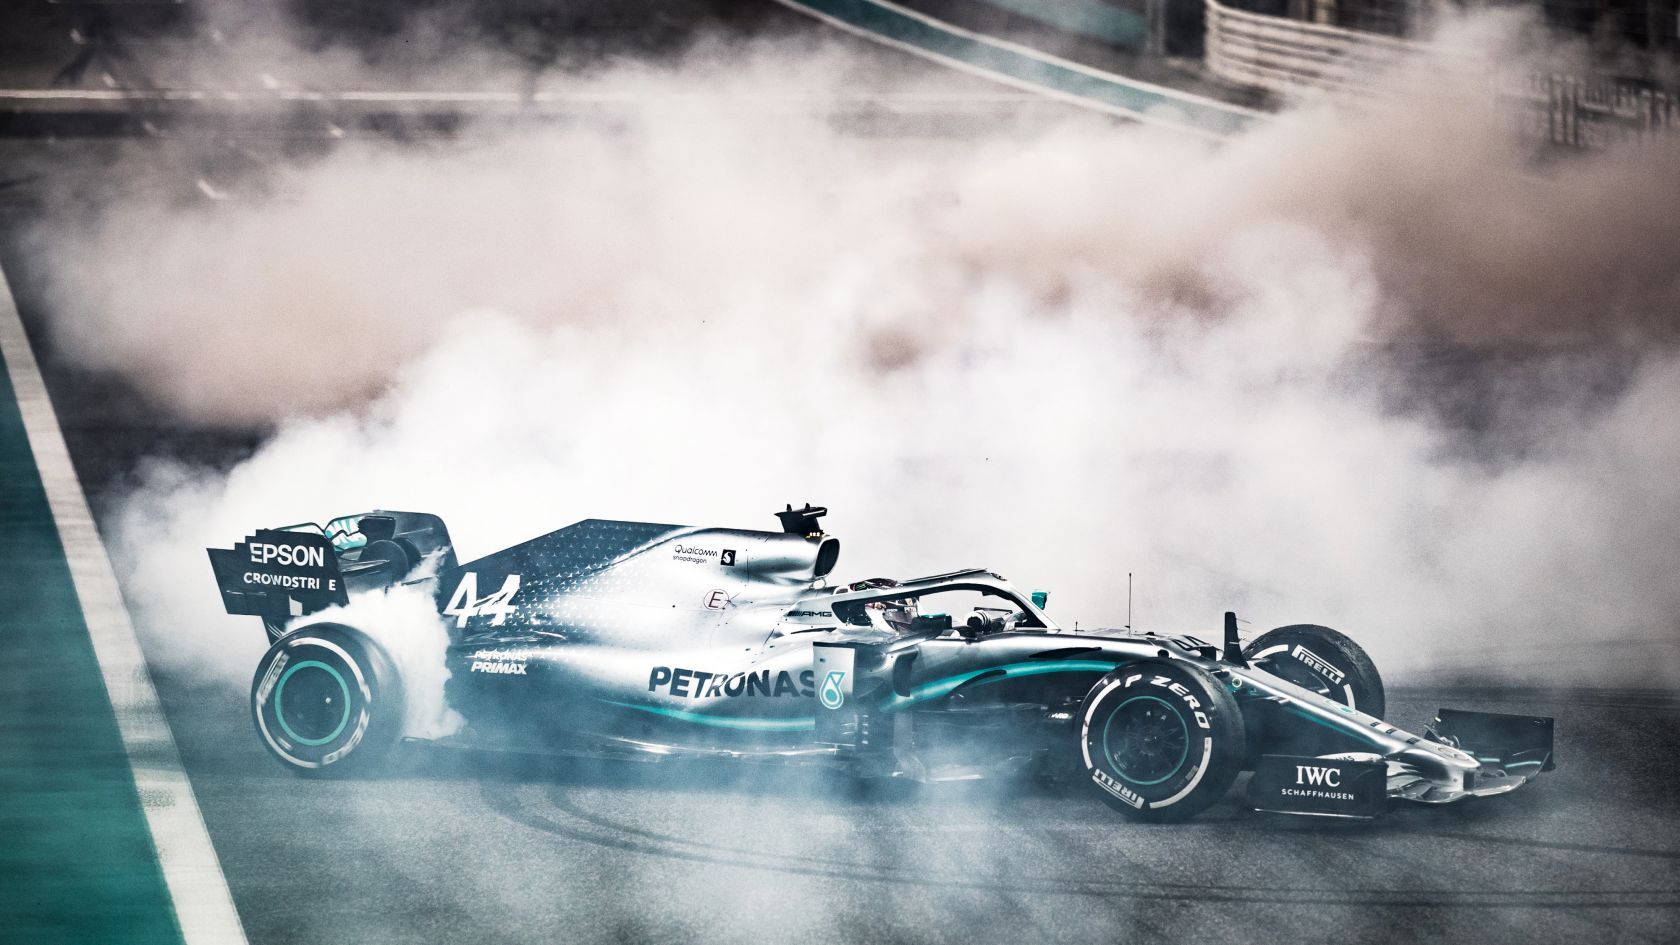 Download 50+ Free AMG Petronas F1 iPhone Wallpapers and HD Background Image...